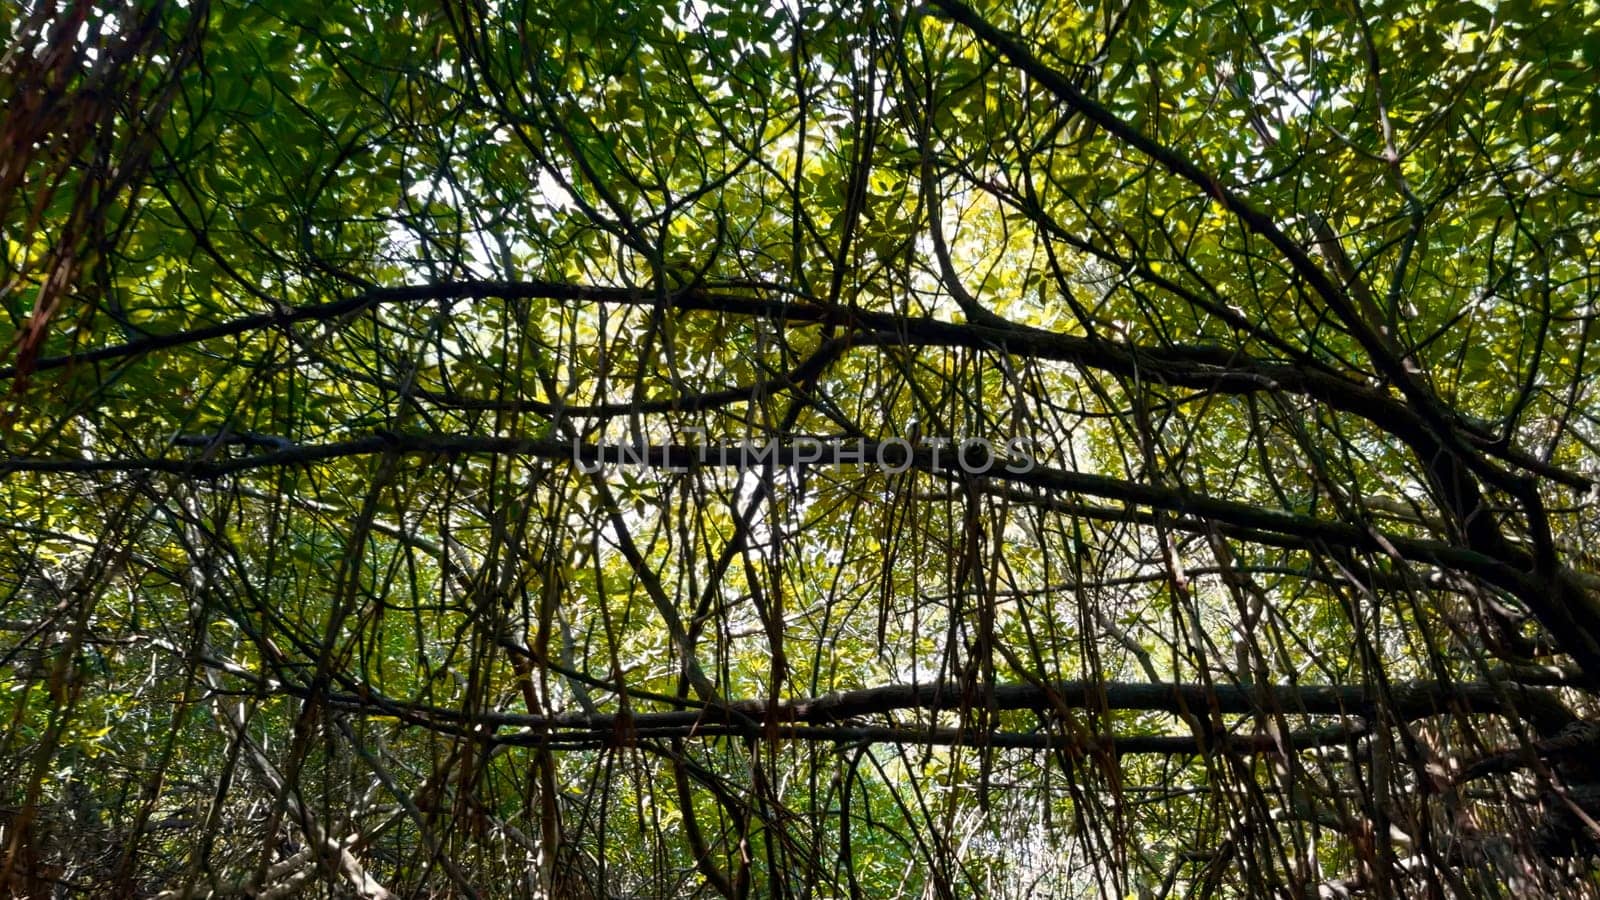 Moving through a tropical forest with large trees and green crowns. Action. Low angle view of hanging branches with green leaves